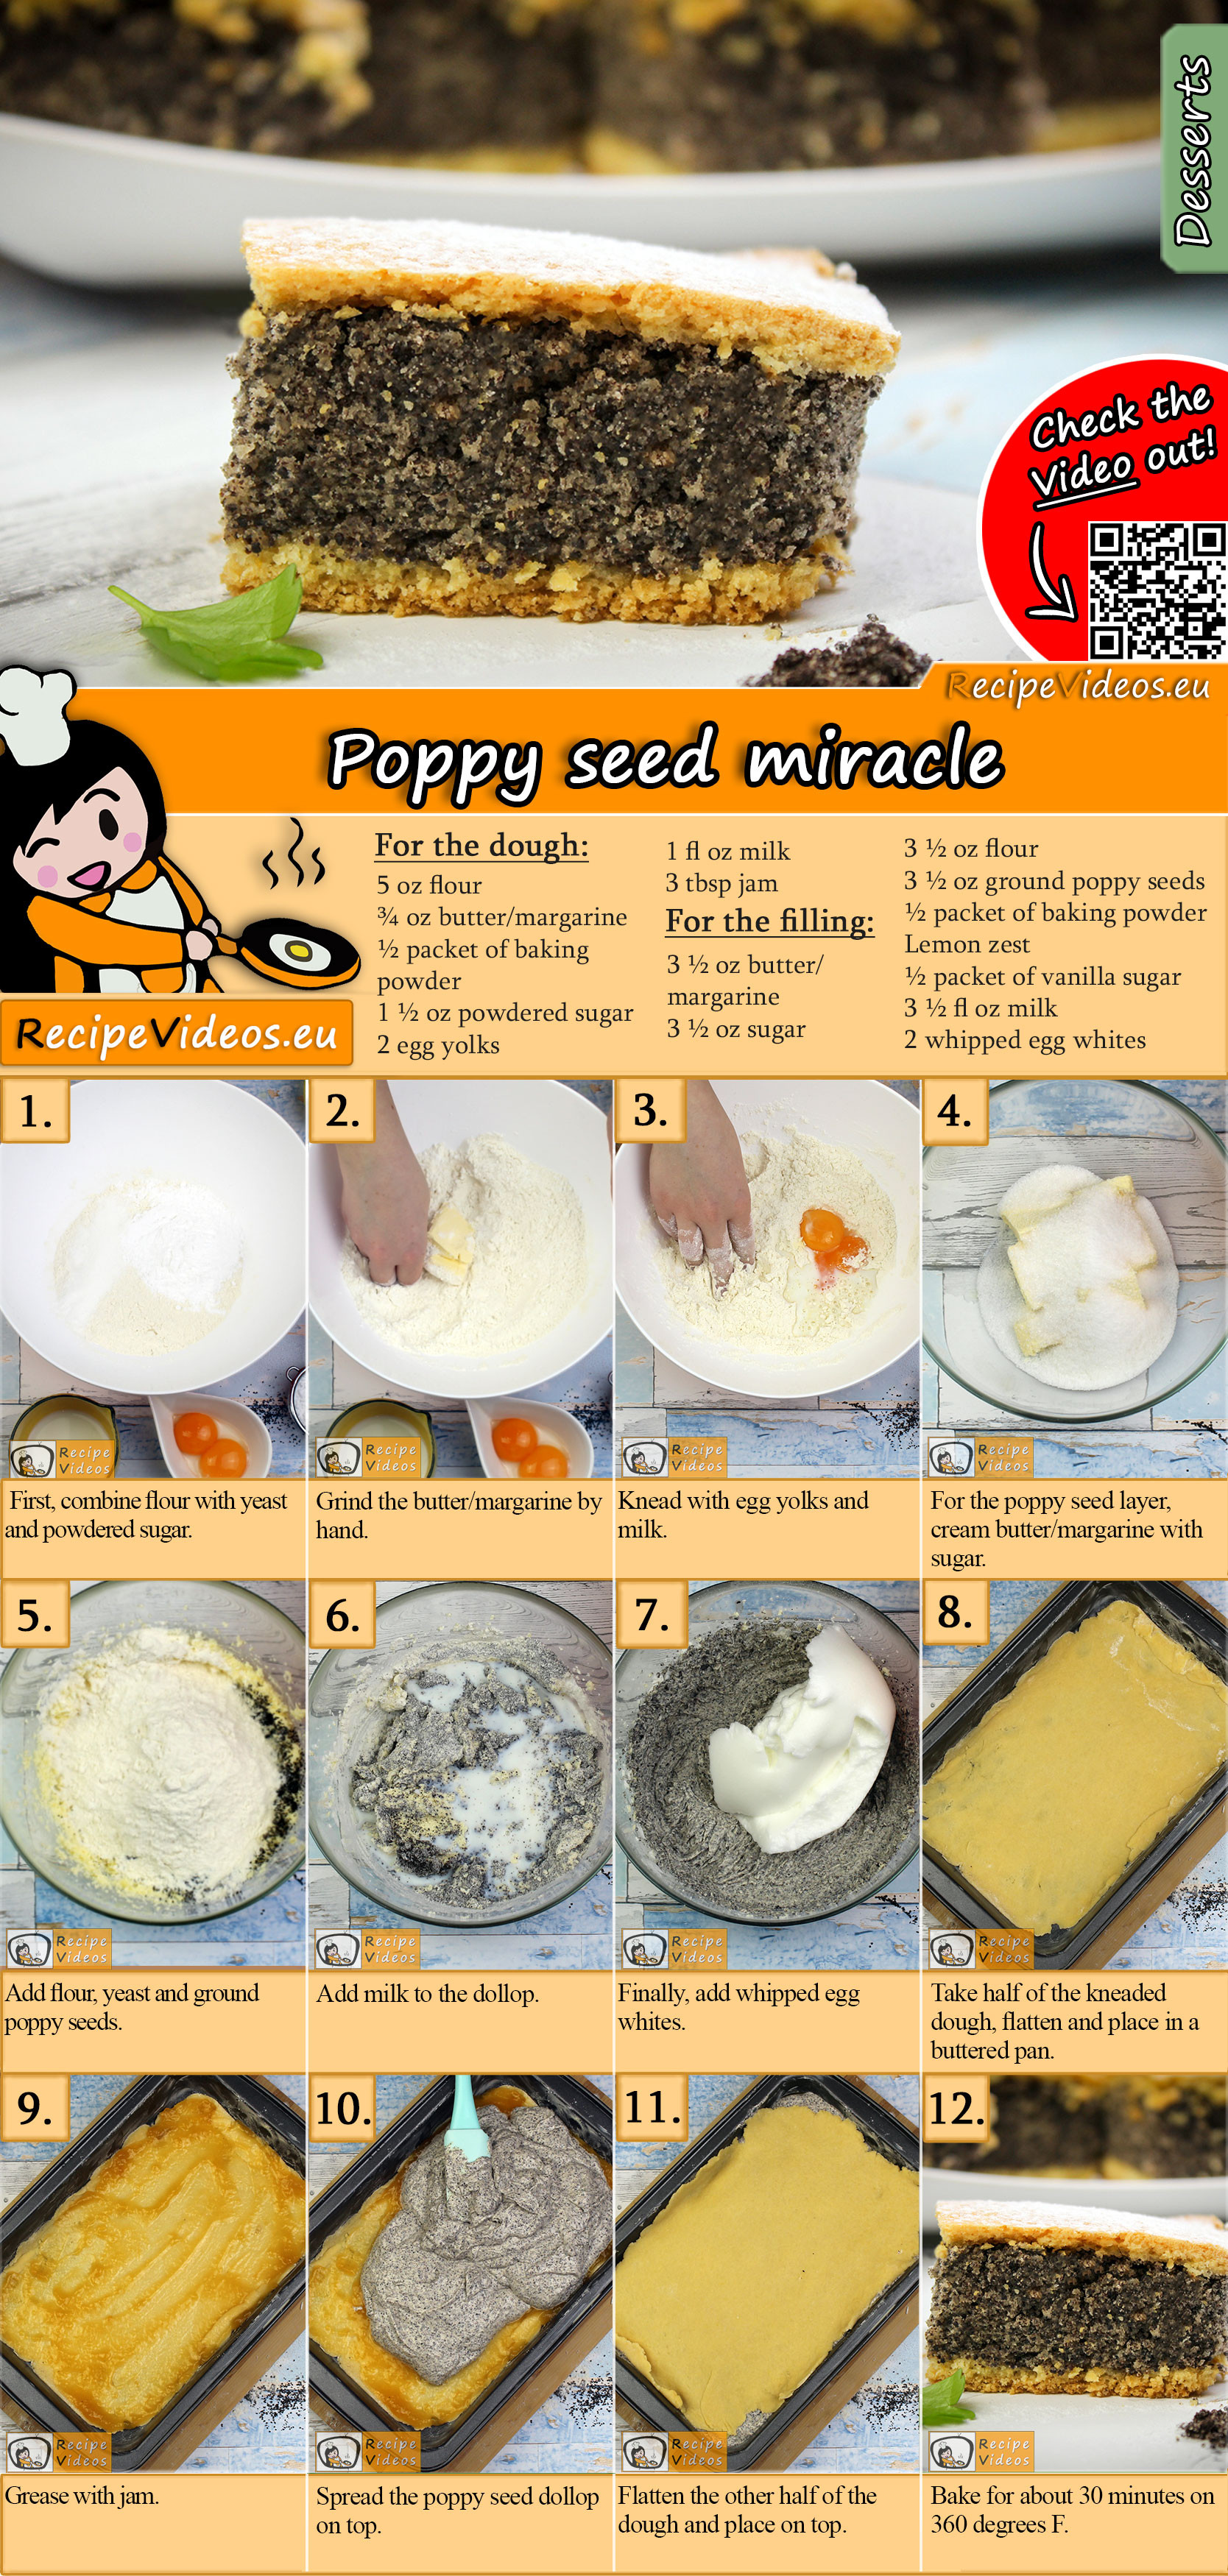 Poppy seed miracle recipe with video